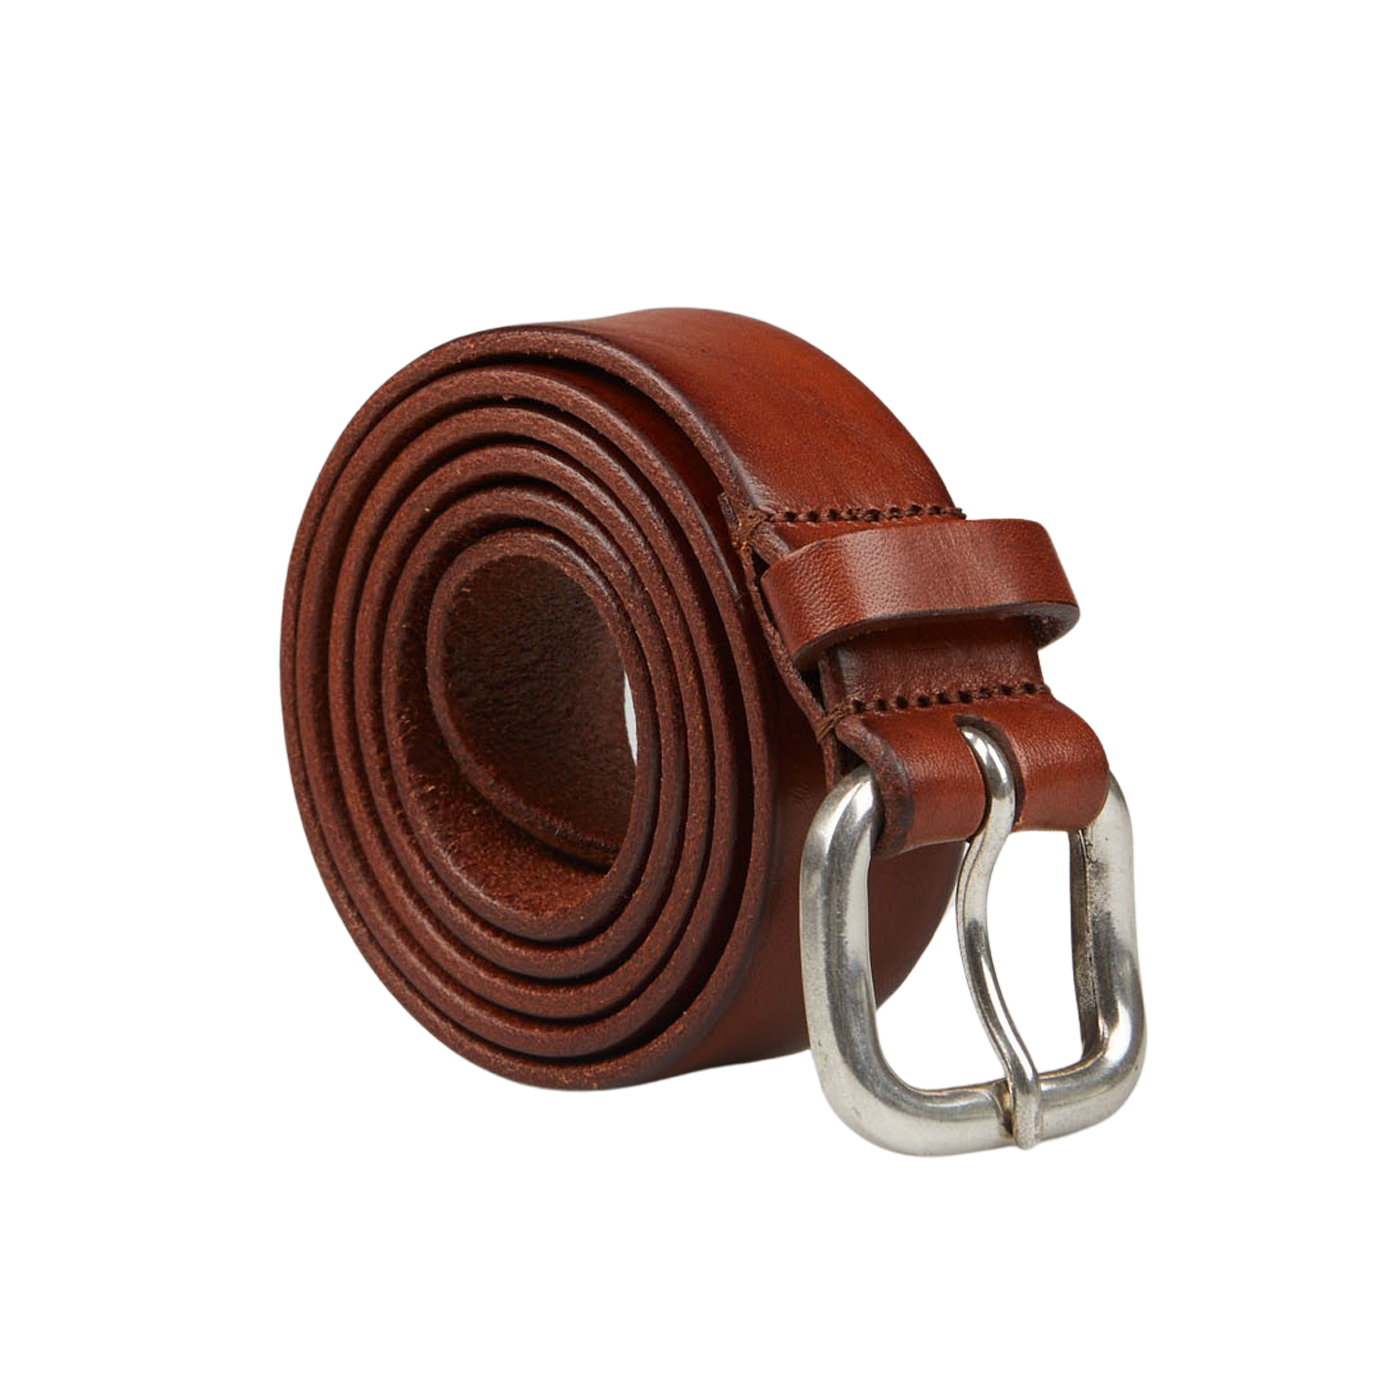 An Anderson's Brown Saddle Leather 30mm Belt on a white background.